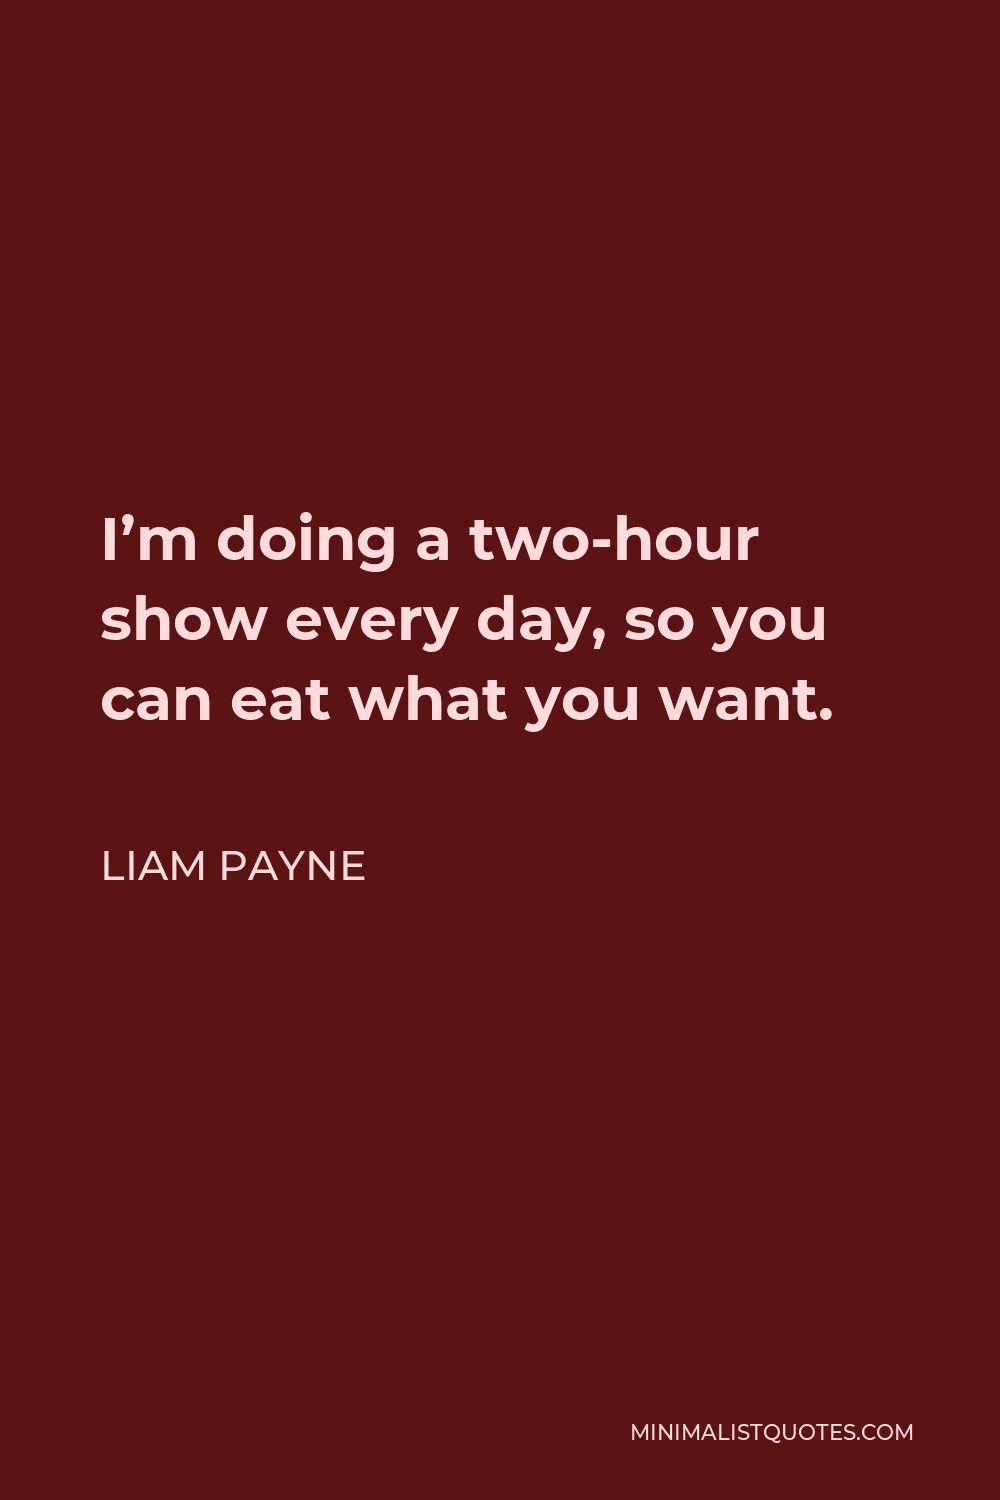 Liam Payne Quote - I’m doing a two-hour show every day, so you can eat what you want.